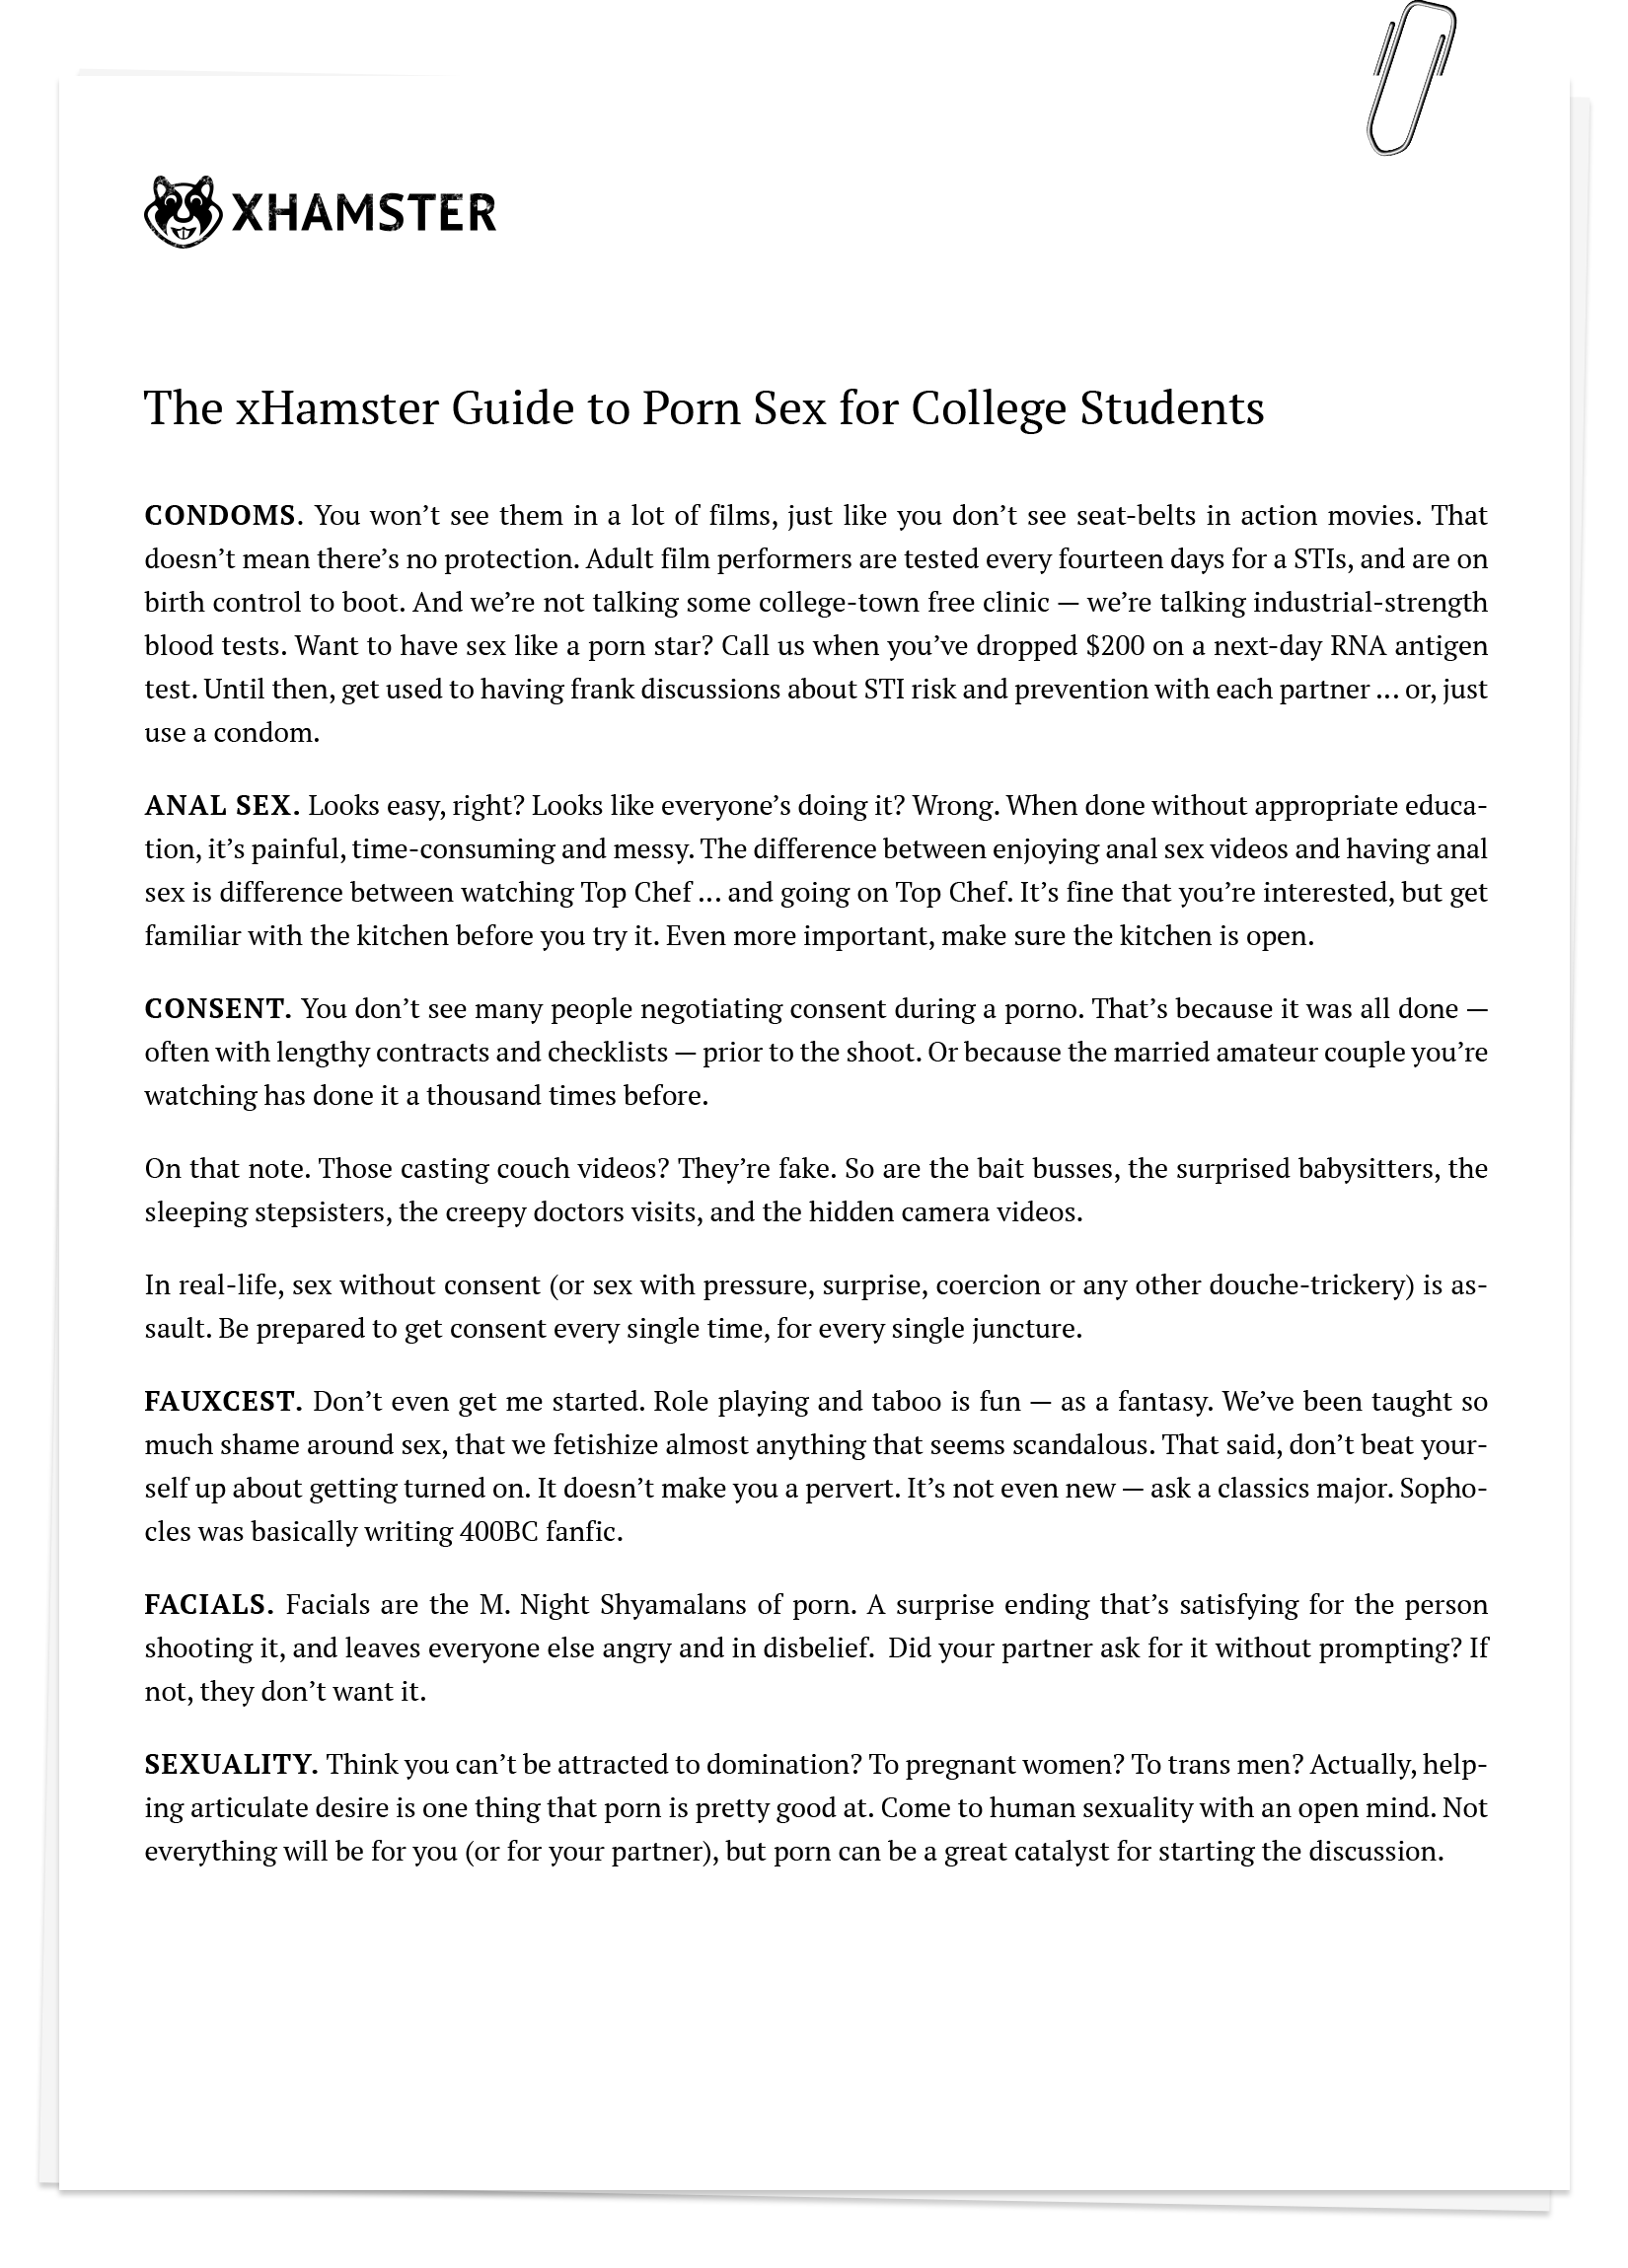 College guide to anal sex